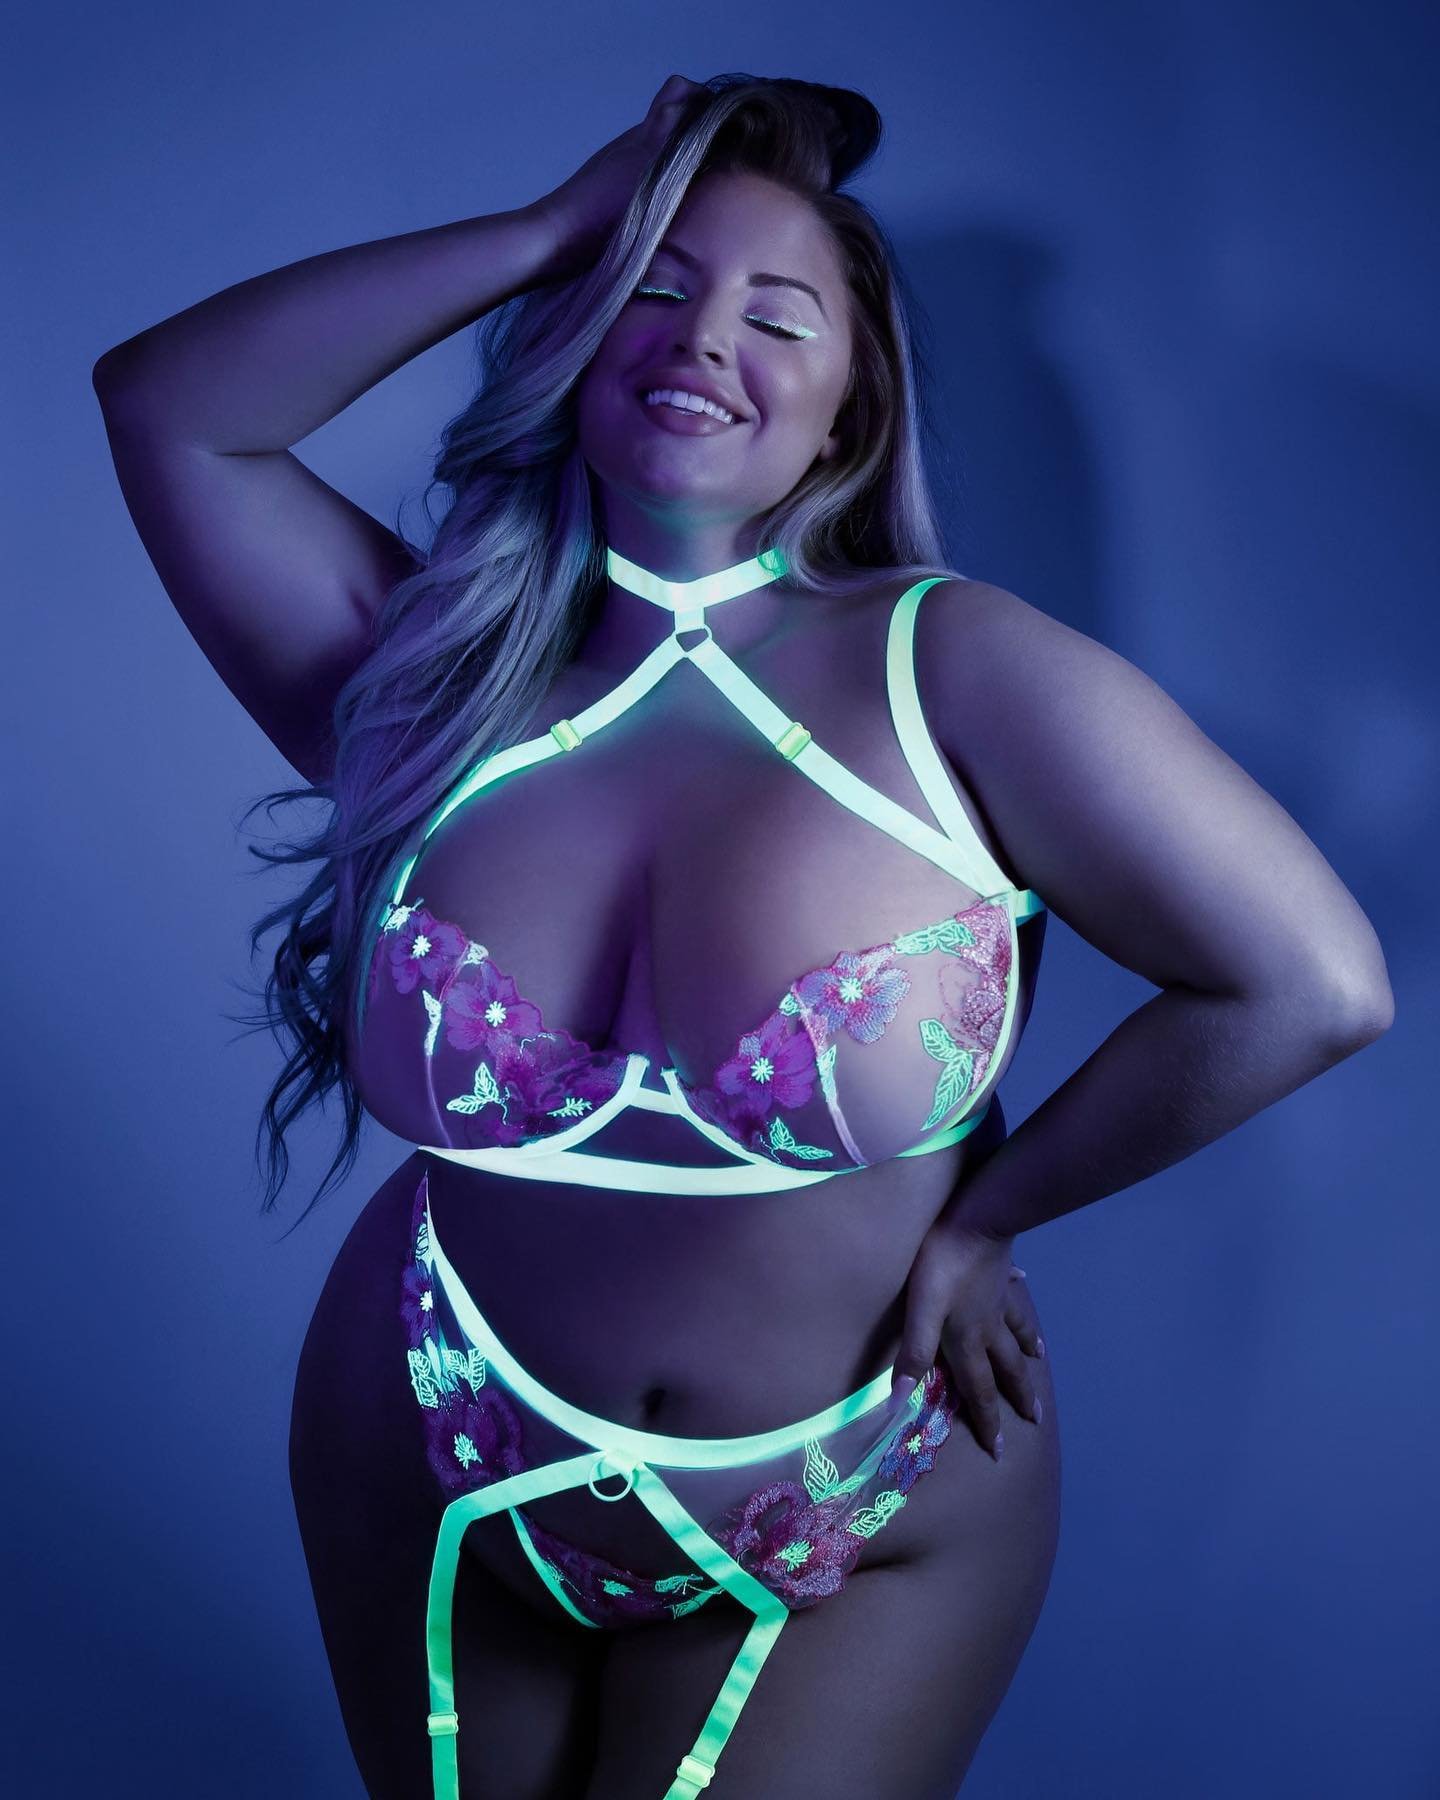 This could be you THIS weekend at the Lingerie Soir&eacute;e!! Stop in today to check out our GLOW fantasy lingerie line and head over to @avlbeautyacademy to get your tickets for the event. We are so hyped to see all you sexy folks showing off your 